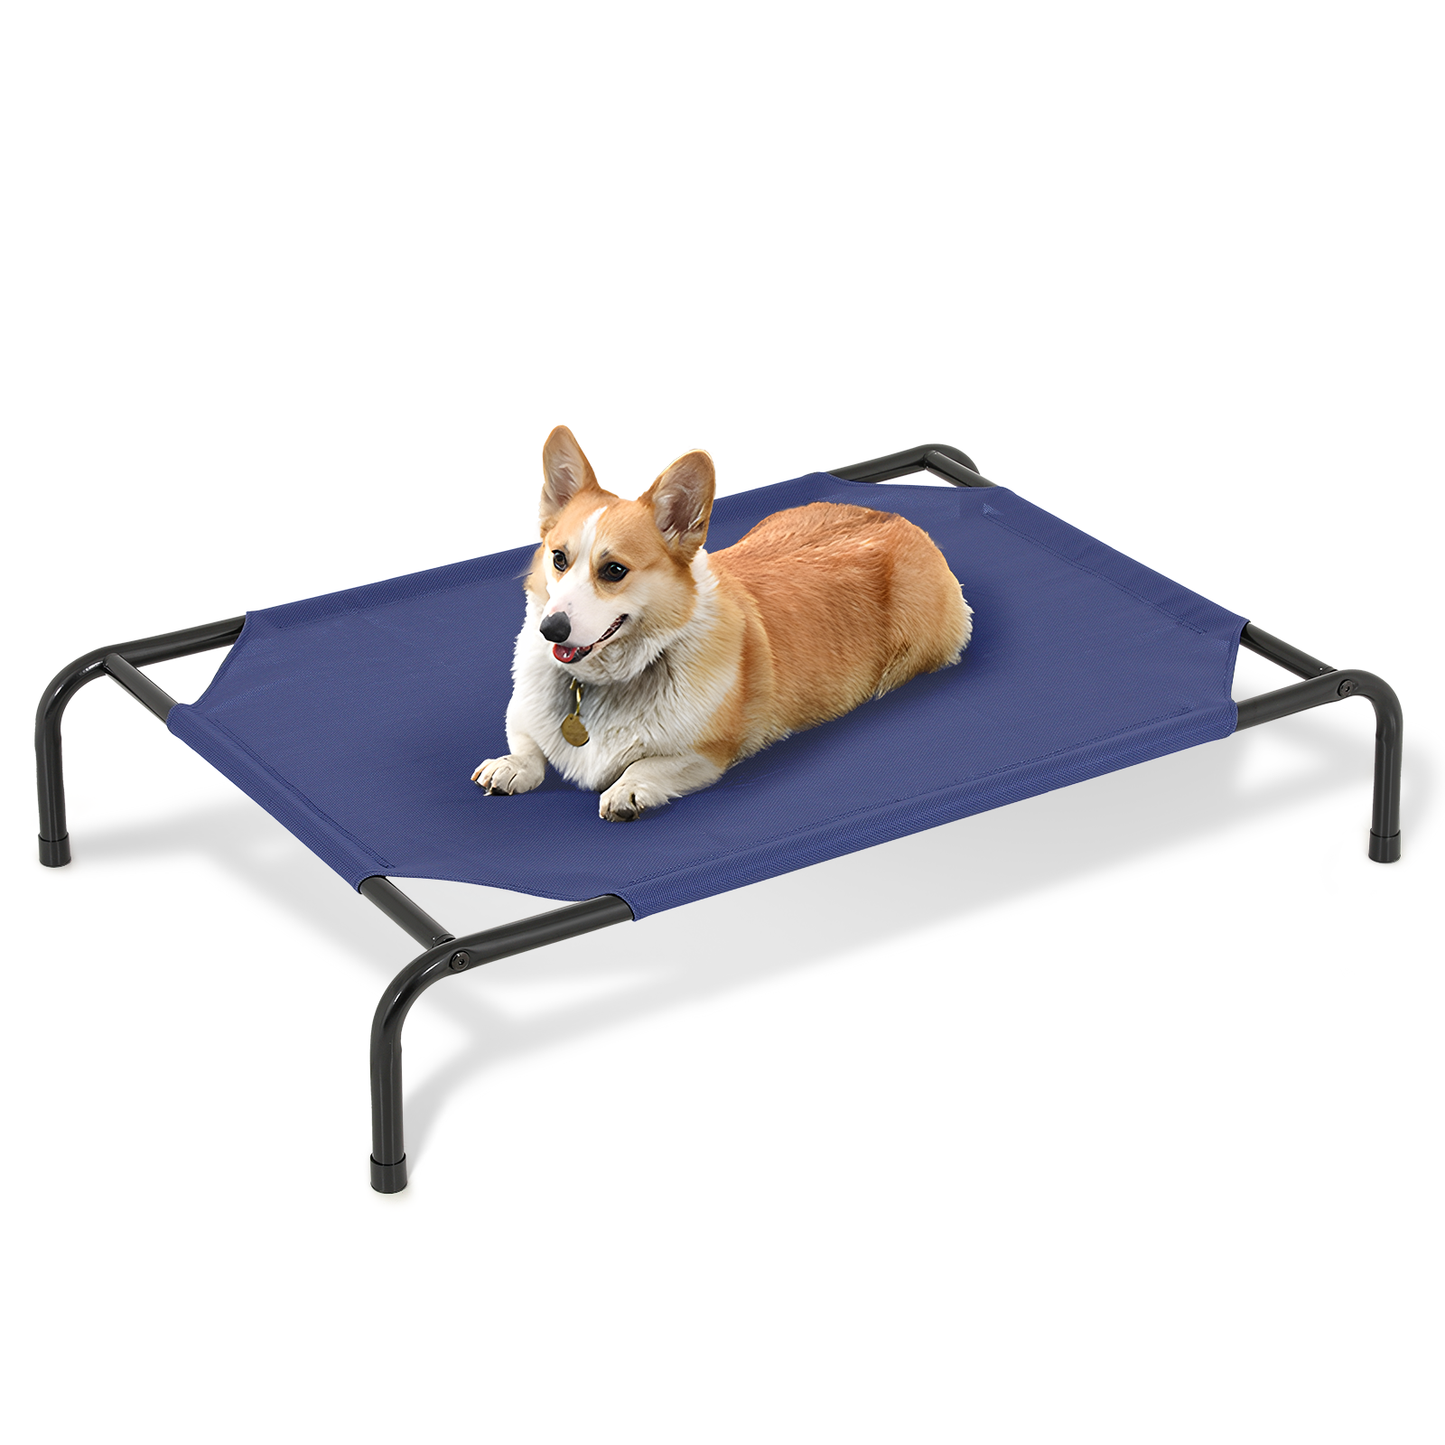 Elevated Dog Bed - Non-Slip Cooling Pet Bed - 42'' Length